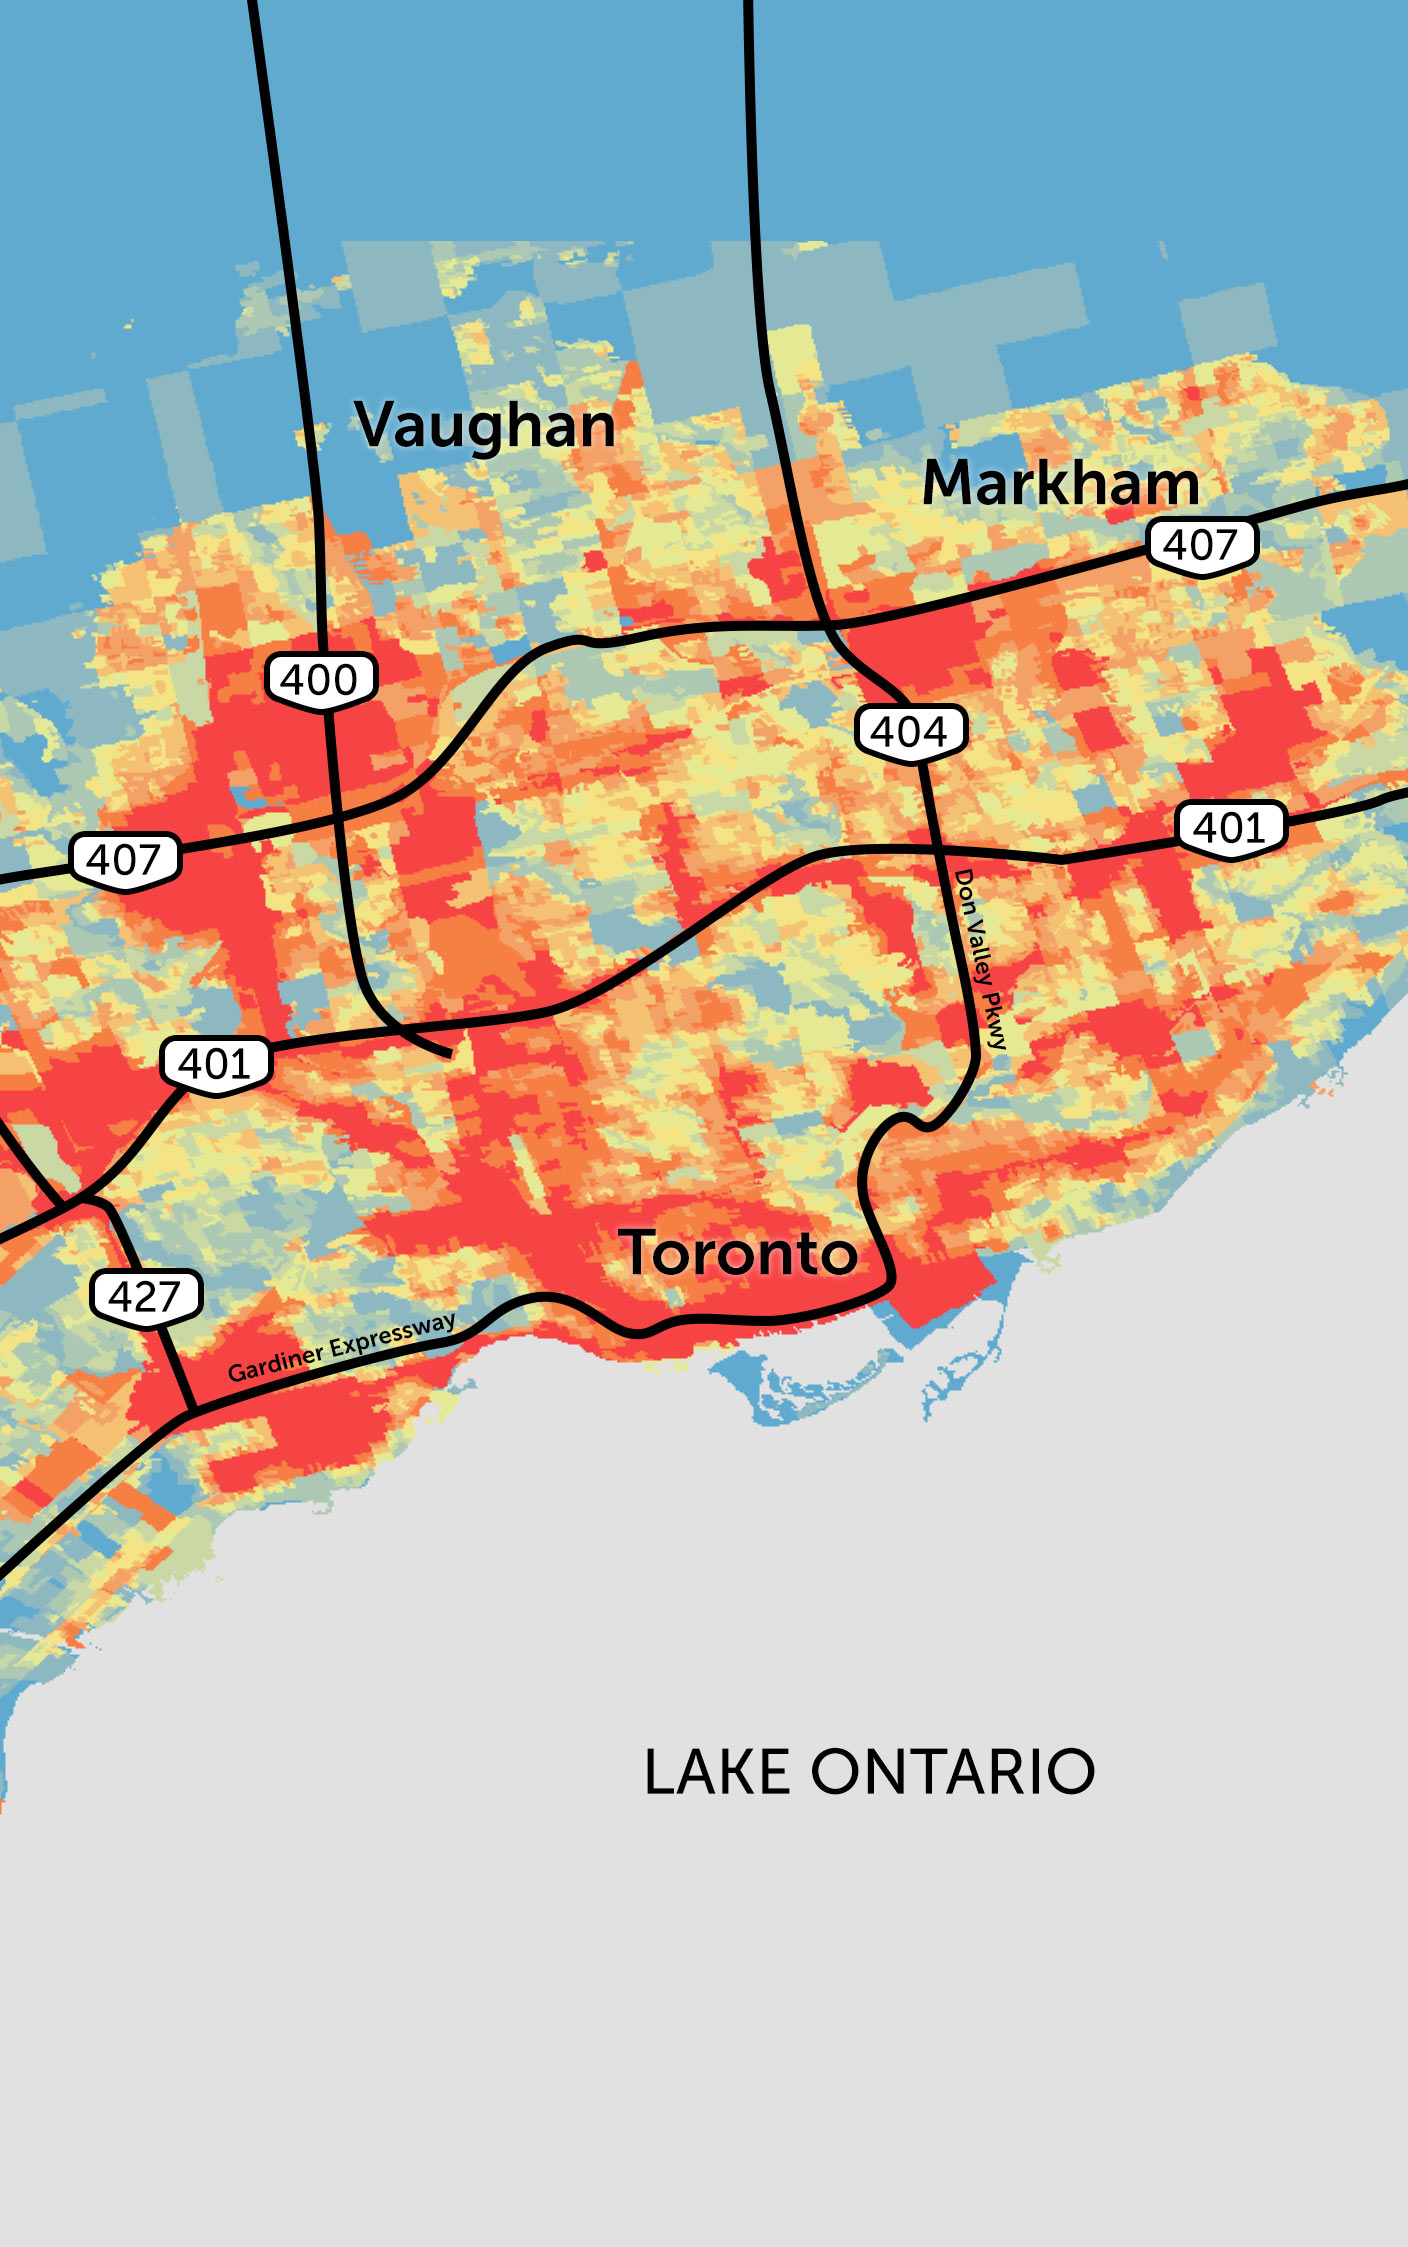 A map of Greater Toronto Area highways and clusters of air pollution around them